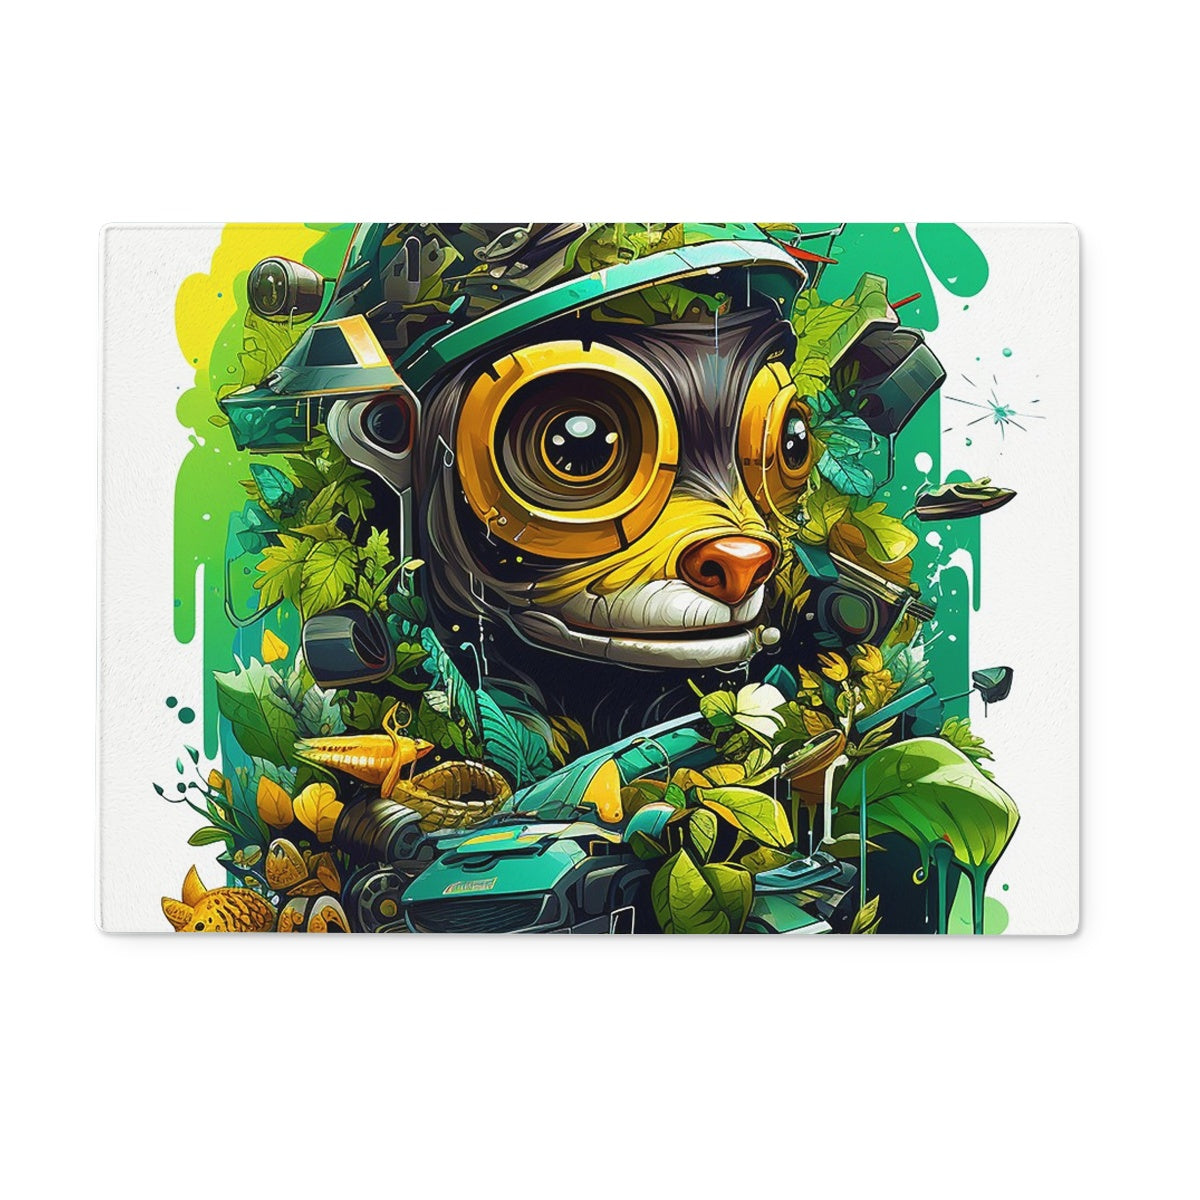 Nature's Resilience: Surreal Auto-Forest Artwork - Whimsical Raccoon and Greenery Infused Car  Glass Chopping Board